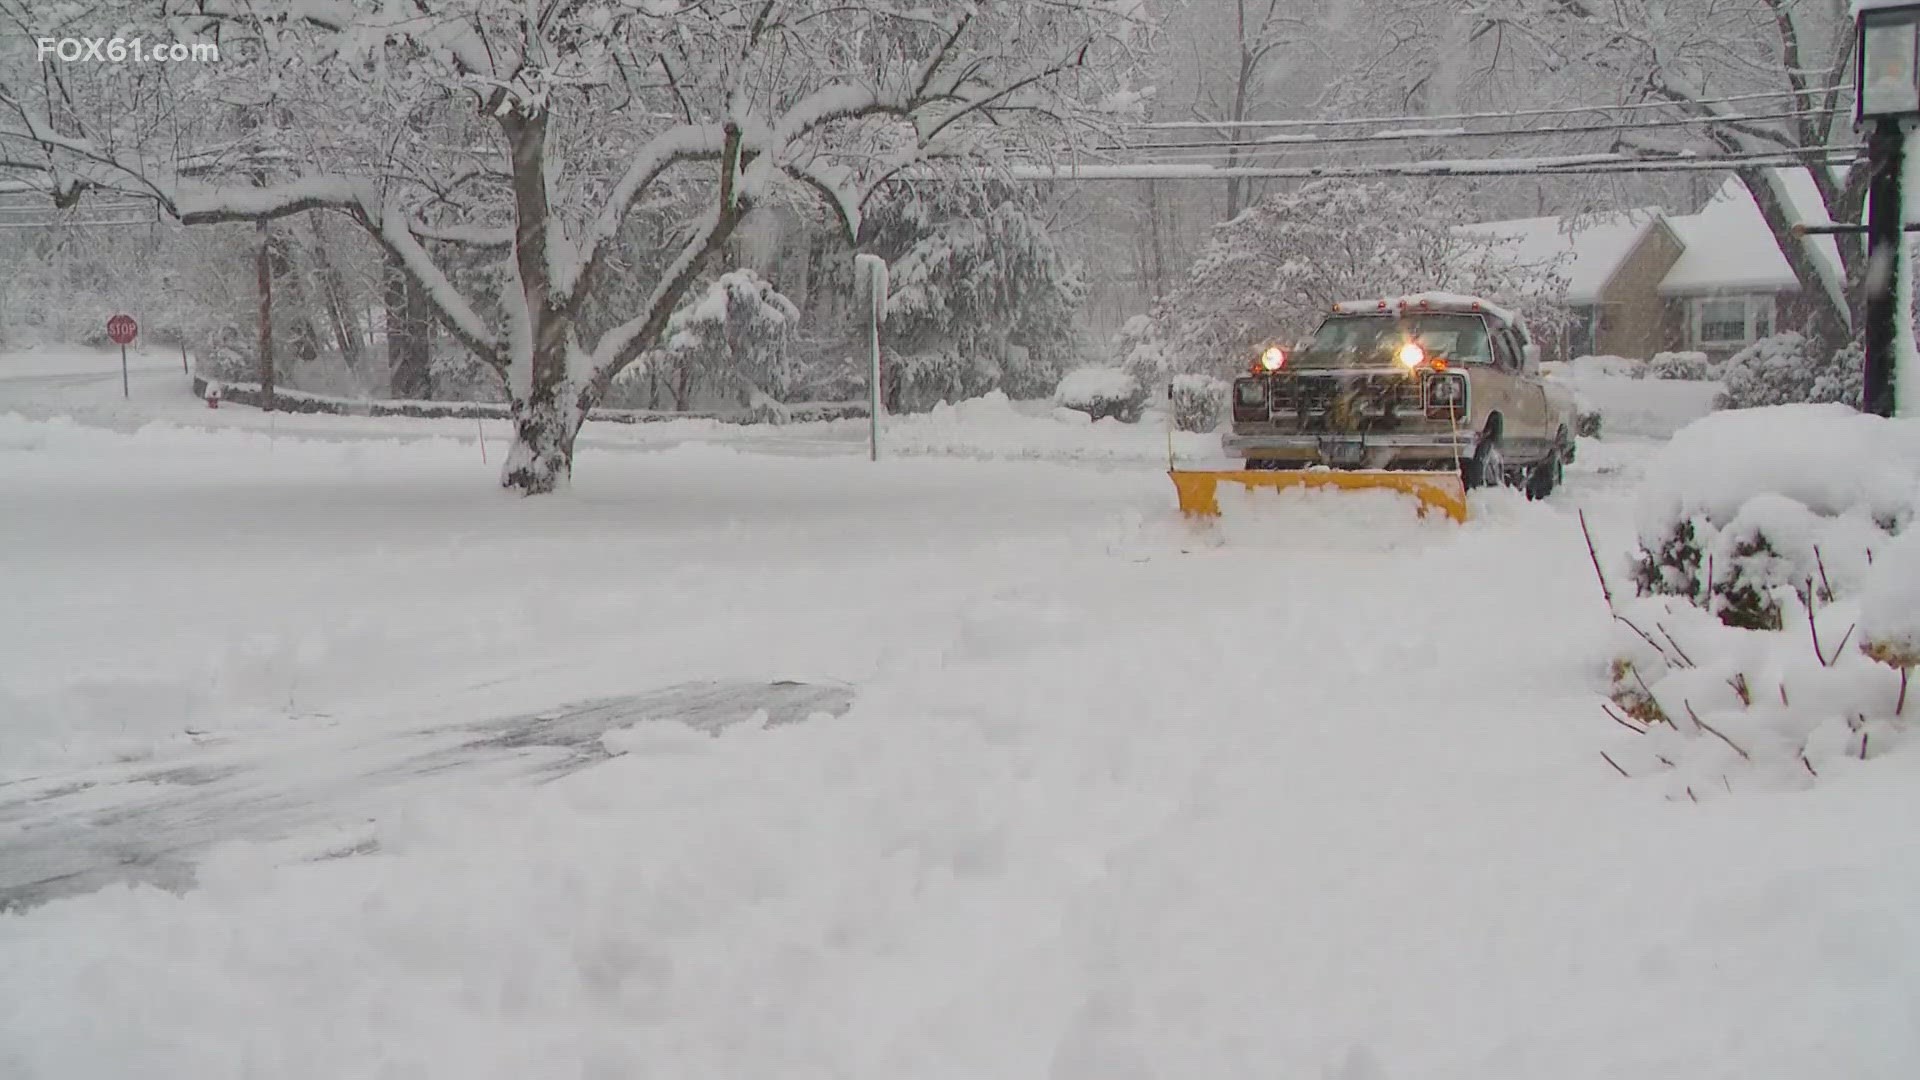 Plow truck driver and skiers got the chance to embrace the snowy weather.